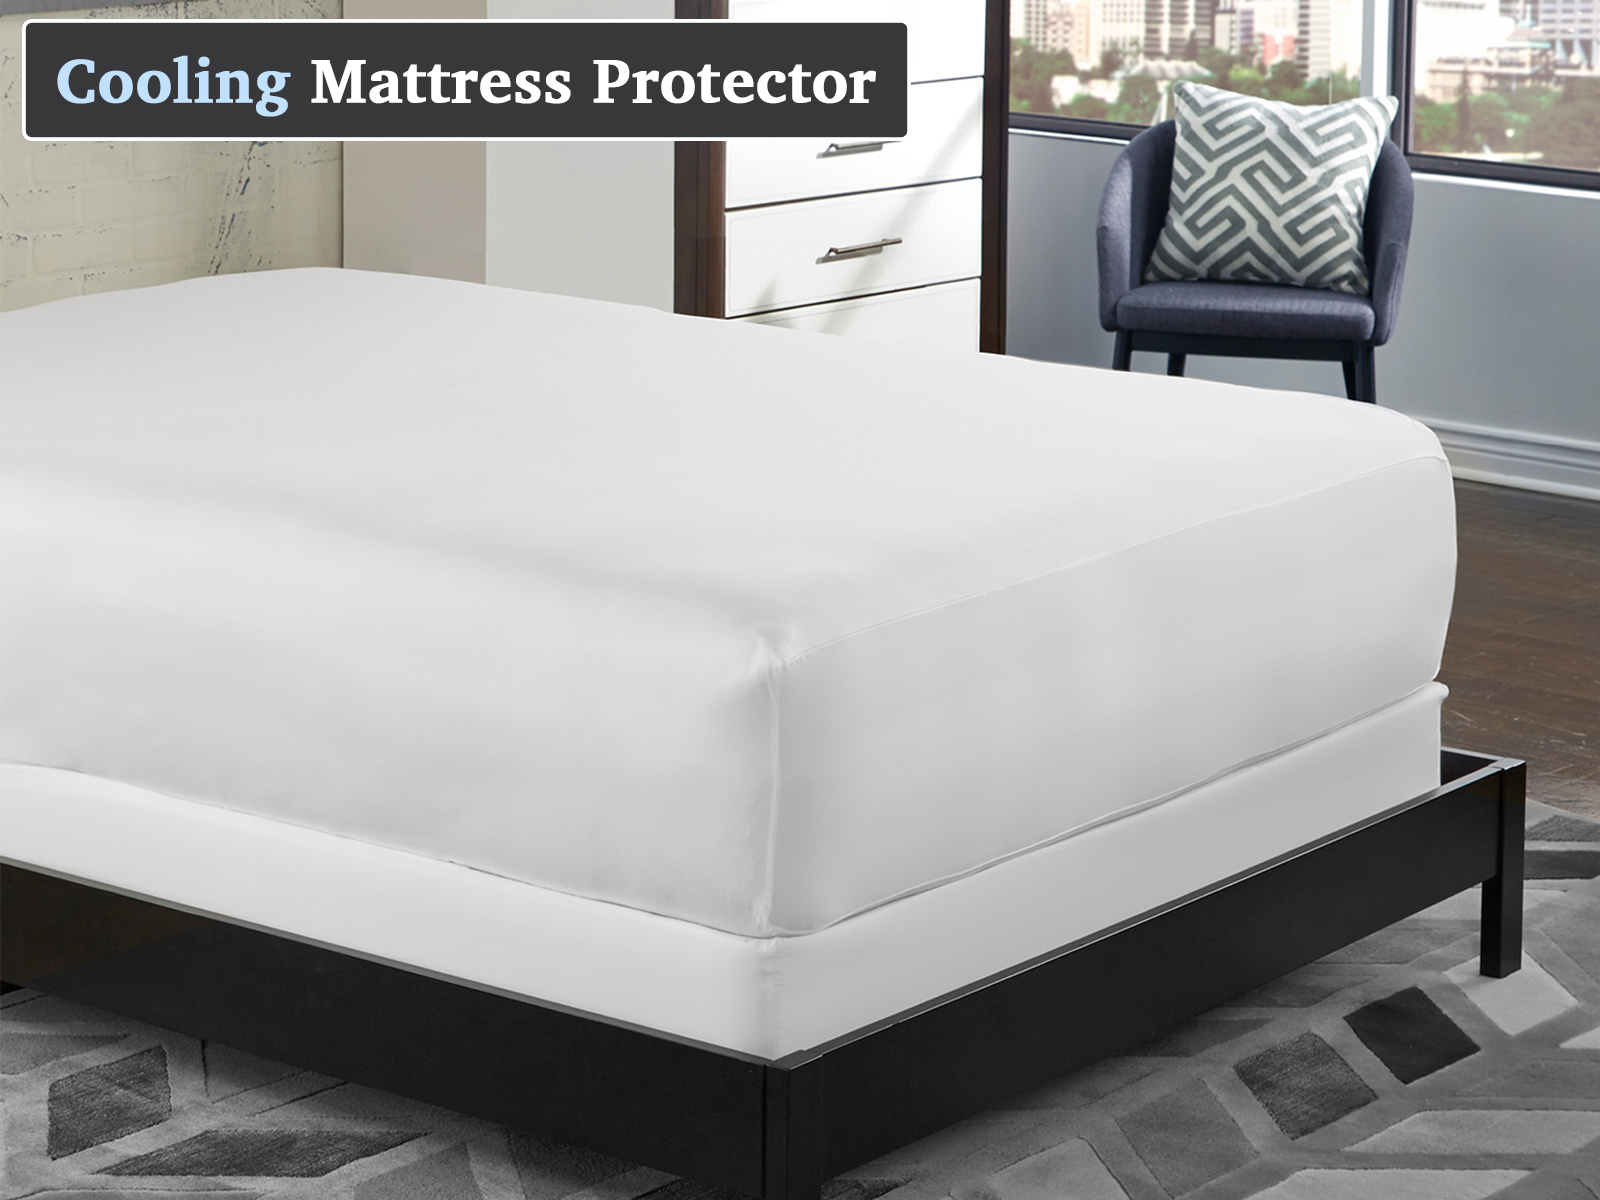 Cooling, 5-Sided Mattress Protector